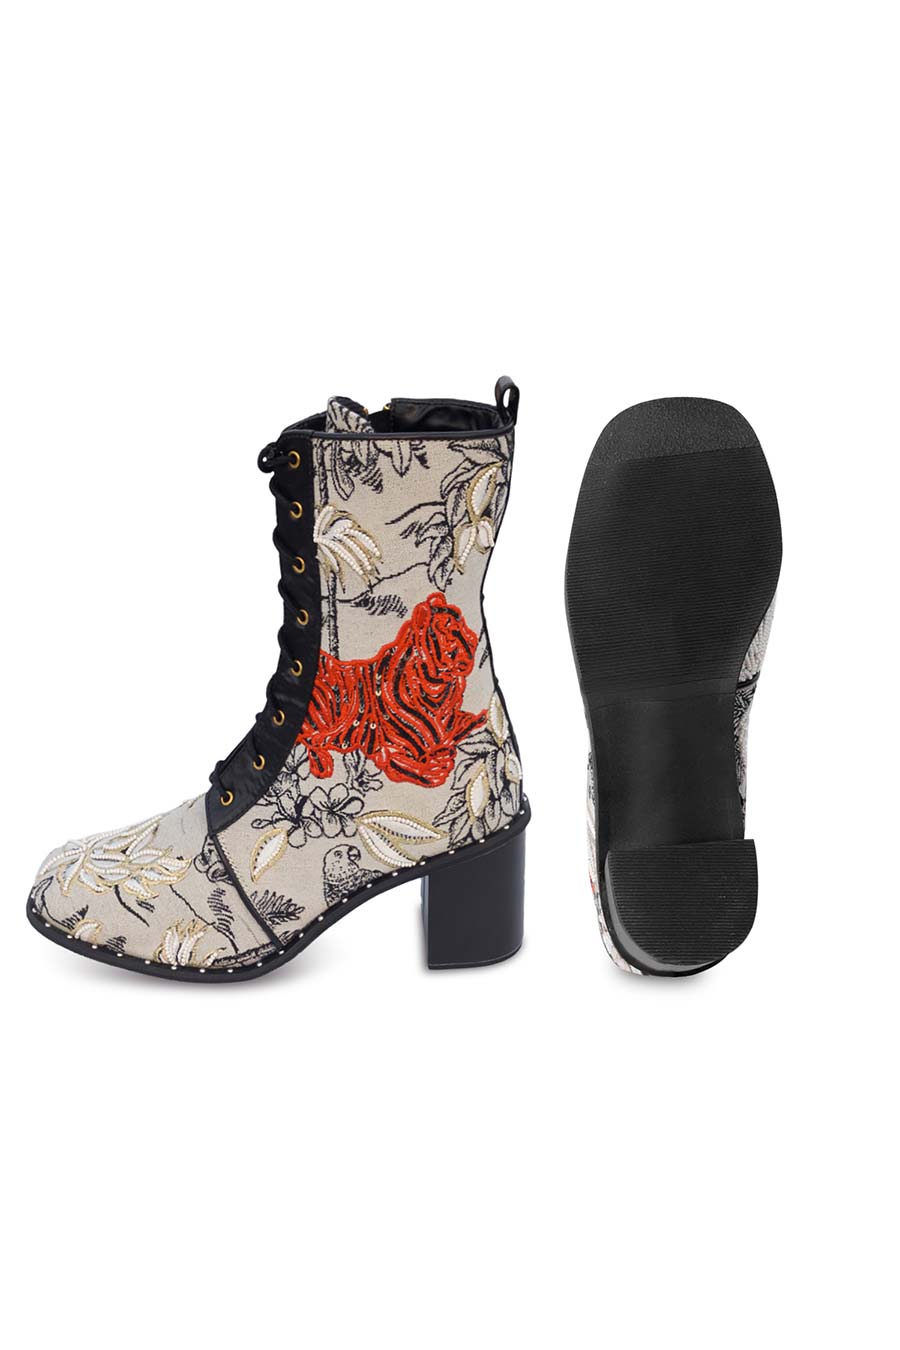 Off-White Embroidered Wild Side Boots